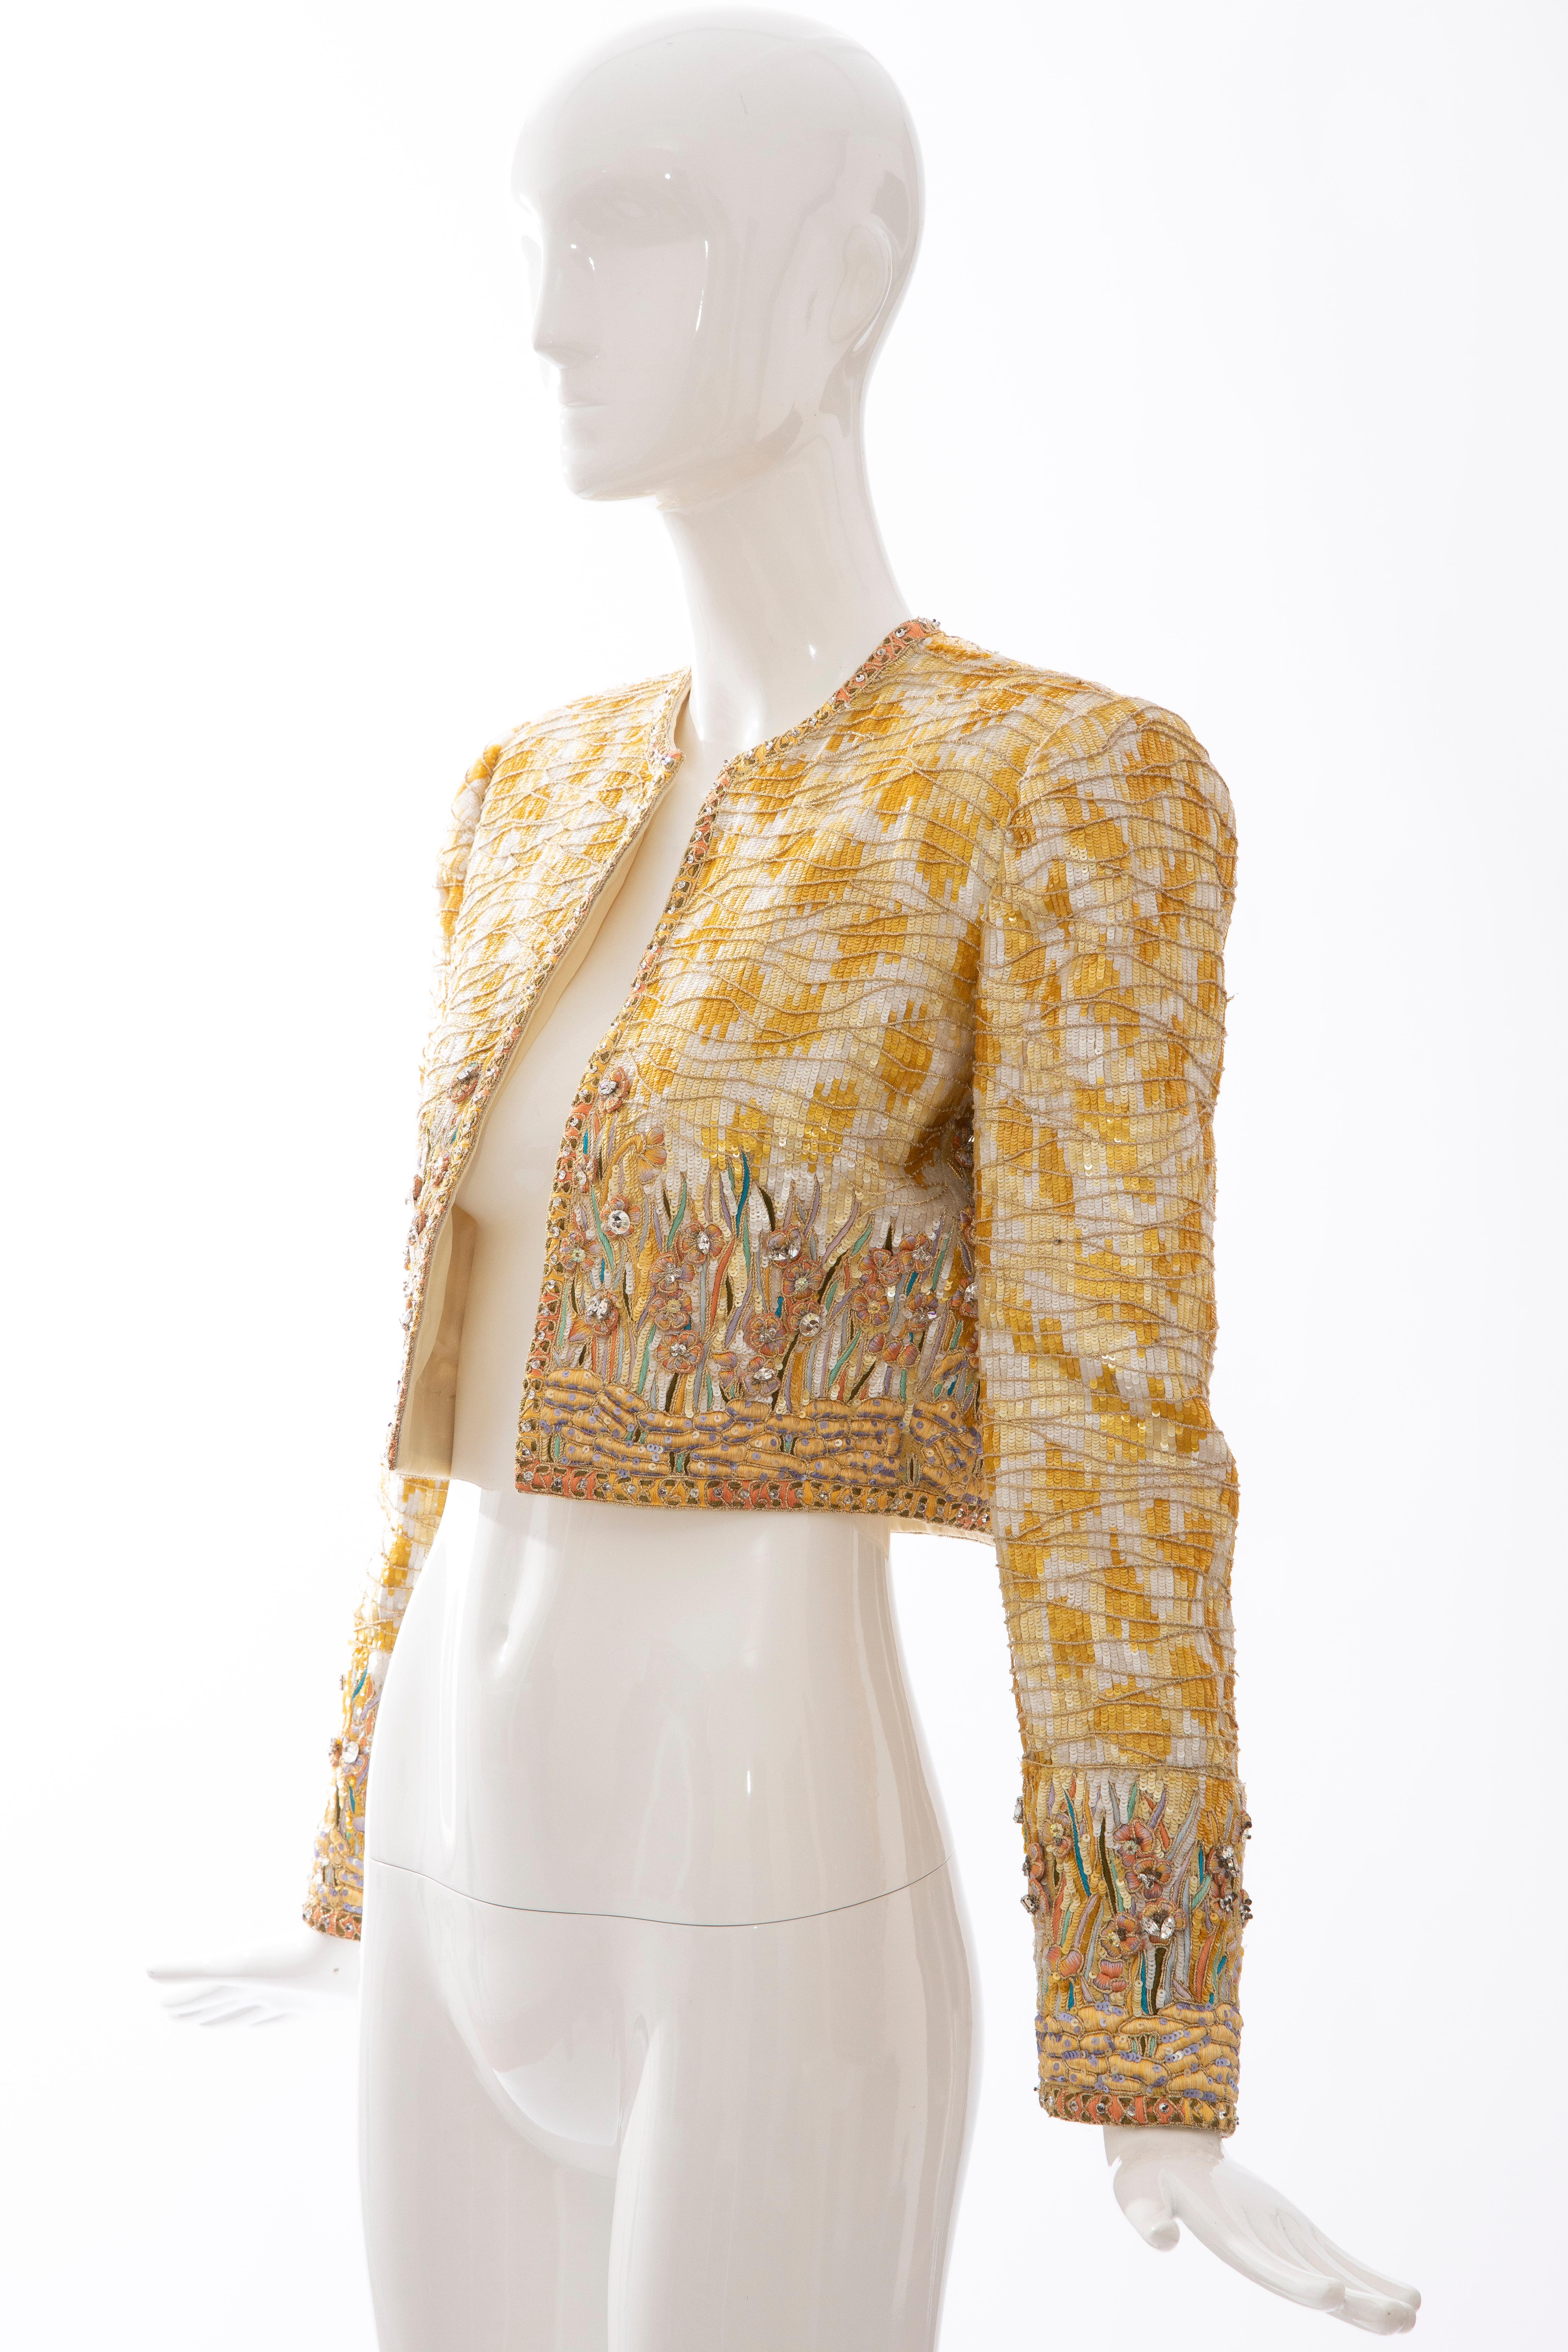 Mary McFadden Couture Silk Embroidered Sequins Diamanté Bolero Jacket, ca. 1980's For Sale 5